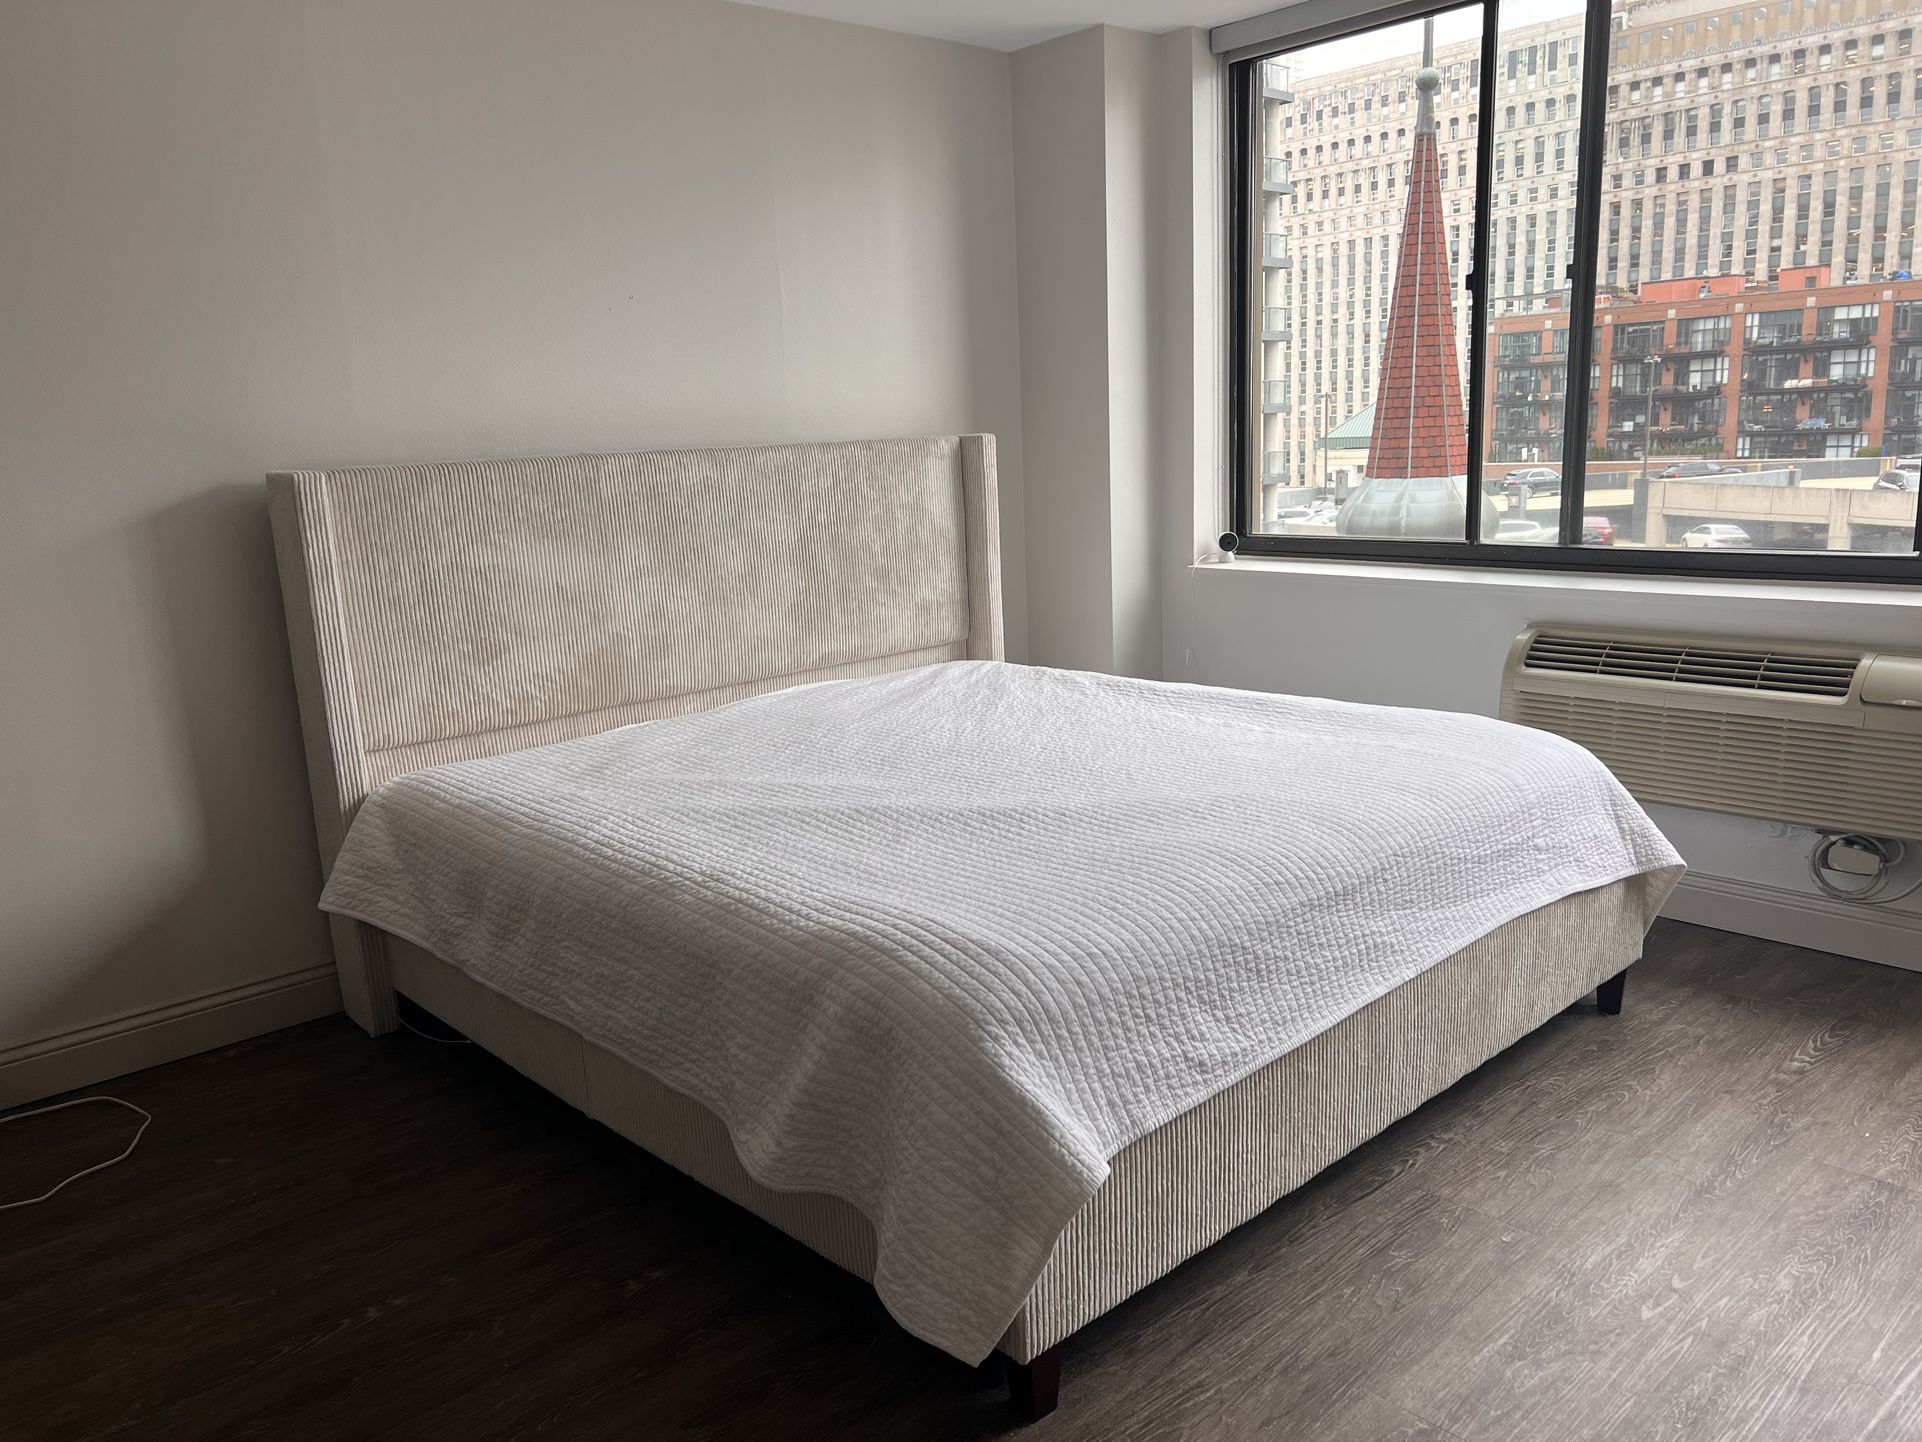 FREE King Bed Frame W Mattress And Sheets 